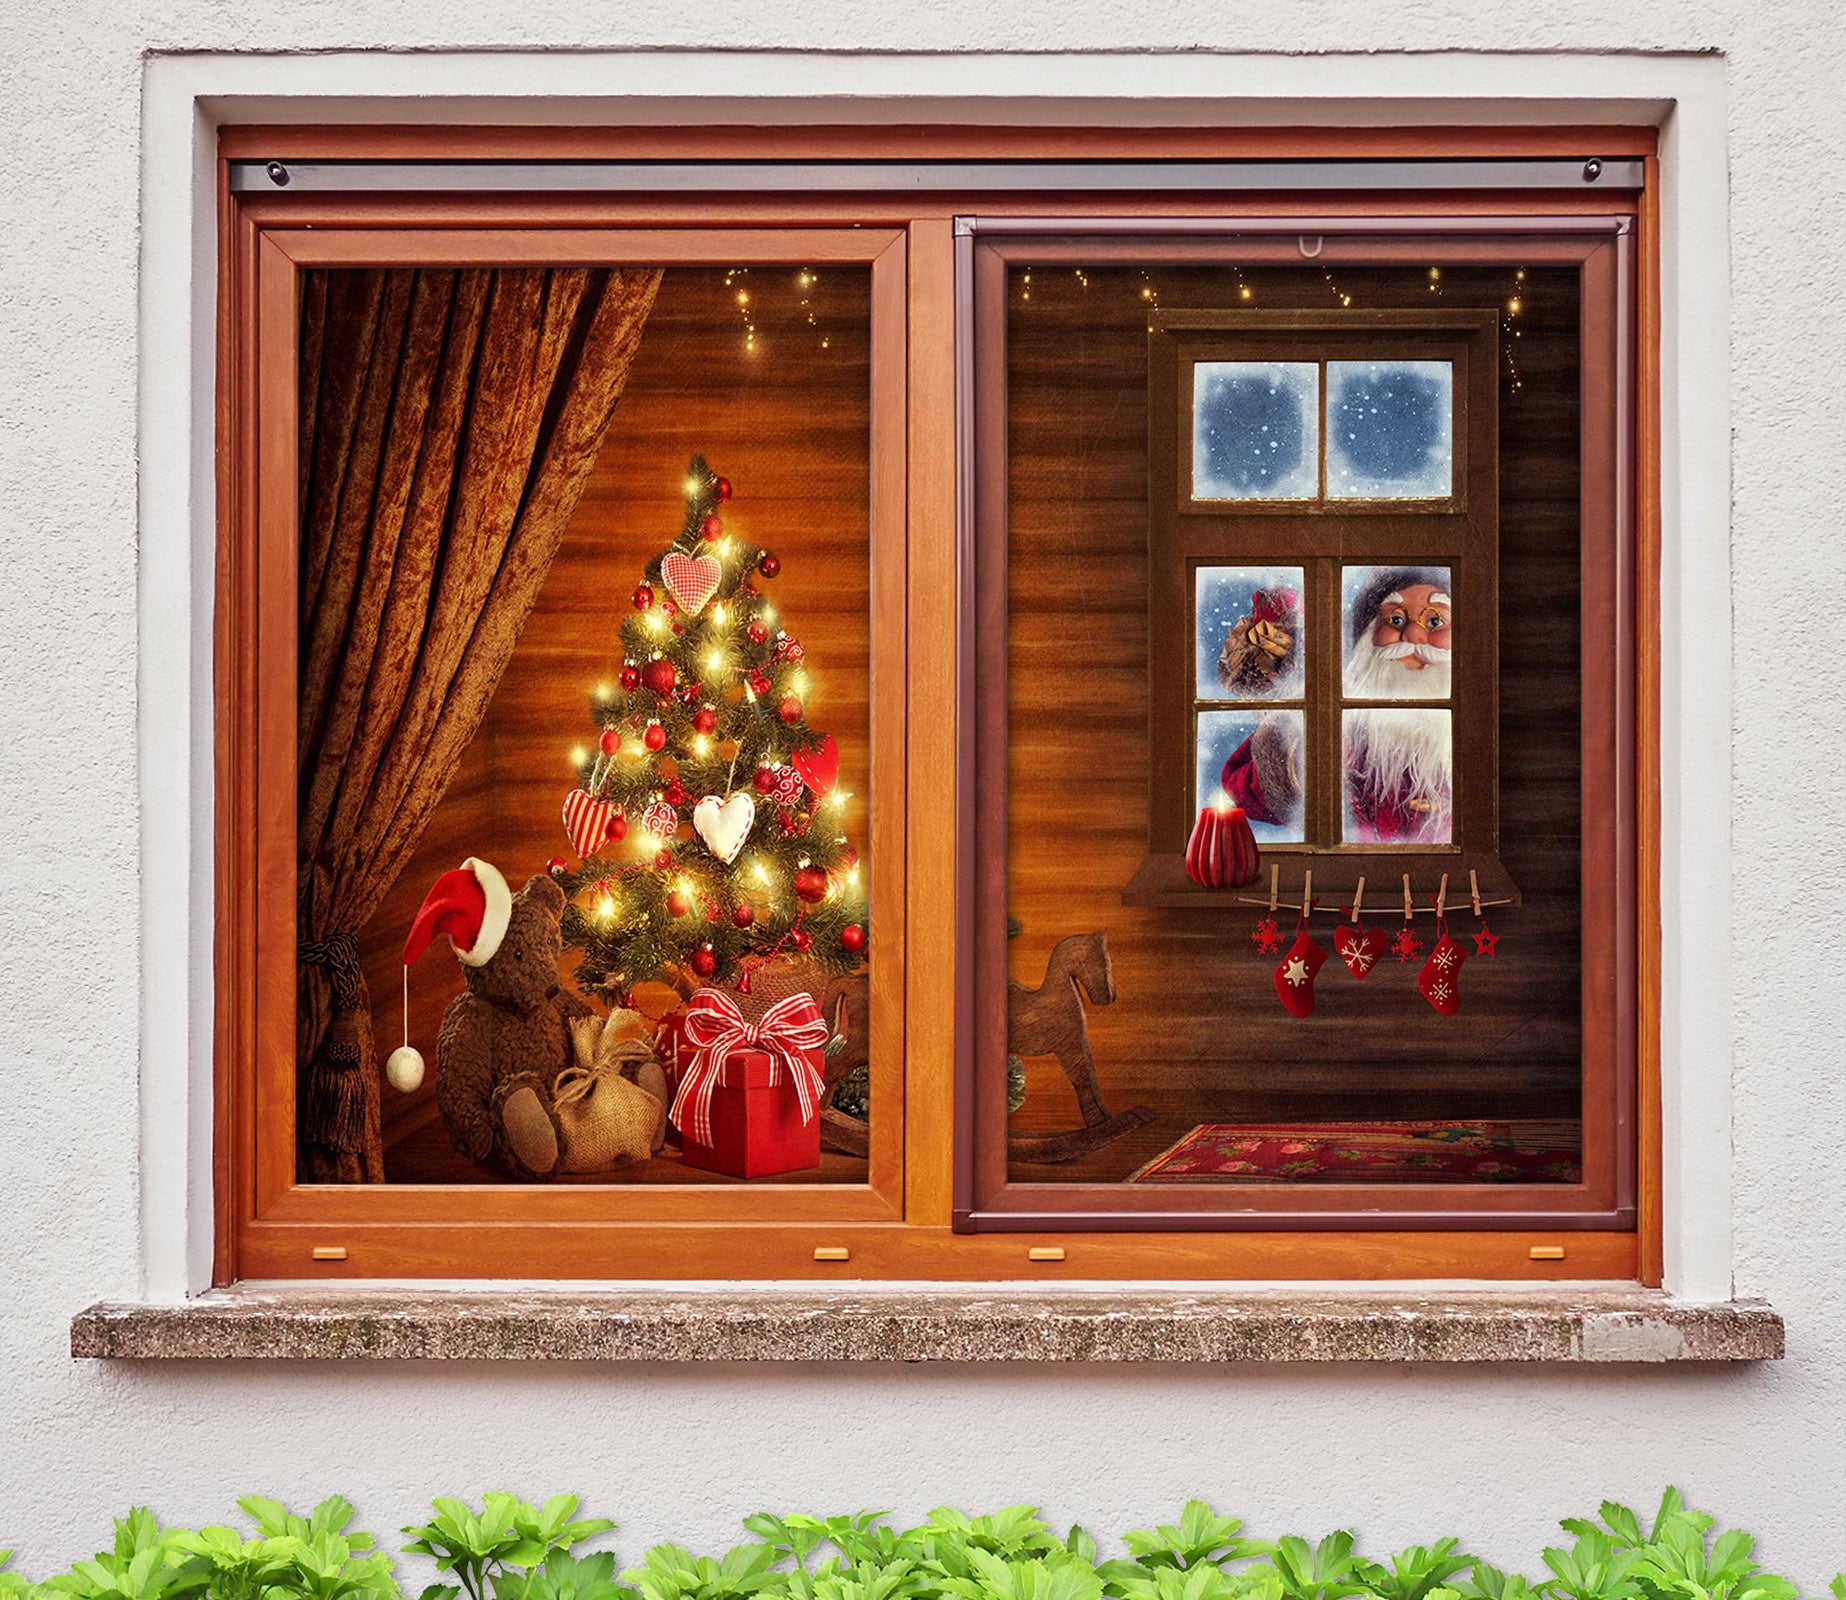 3D Wooden House Santa 42167 Christmas Window Film Print Sticker Cling Stained Glass Xmas